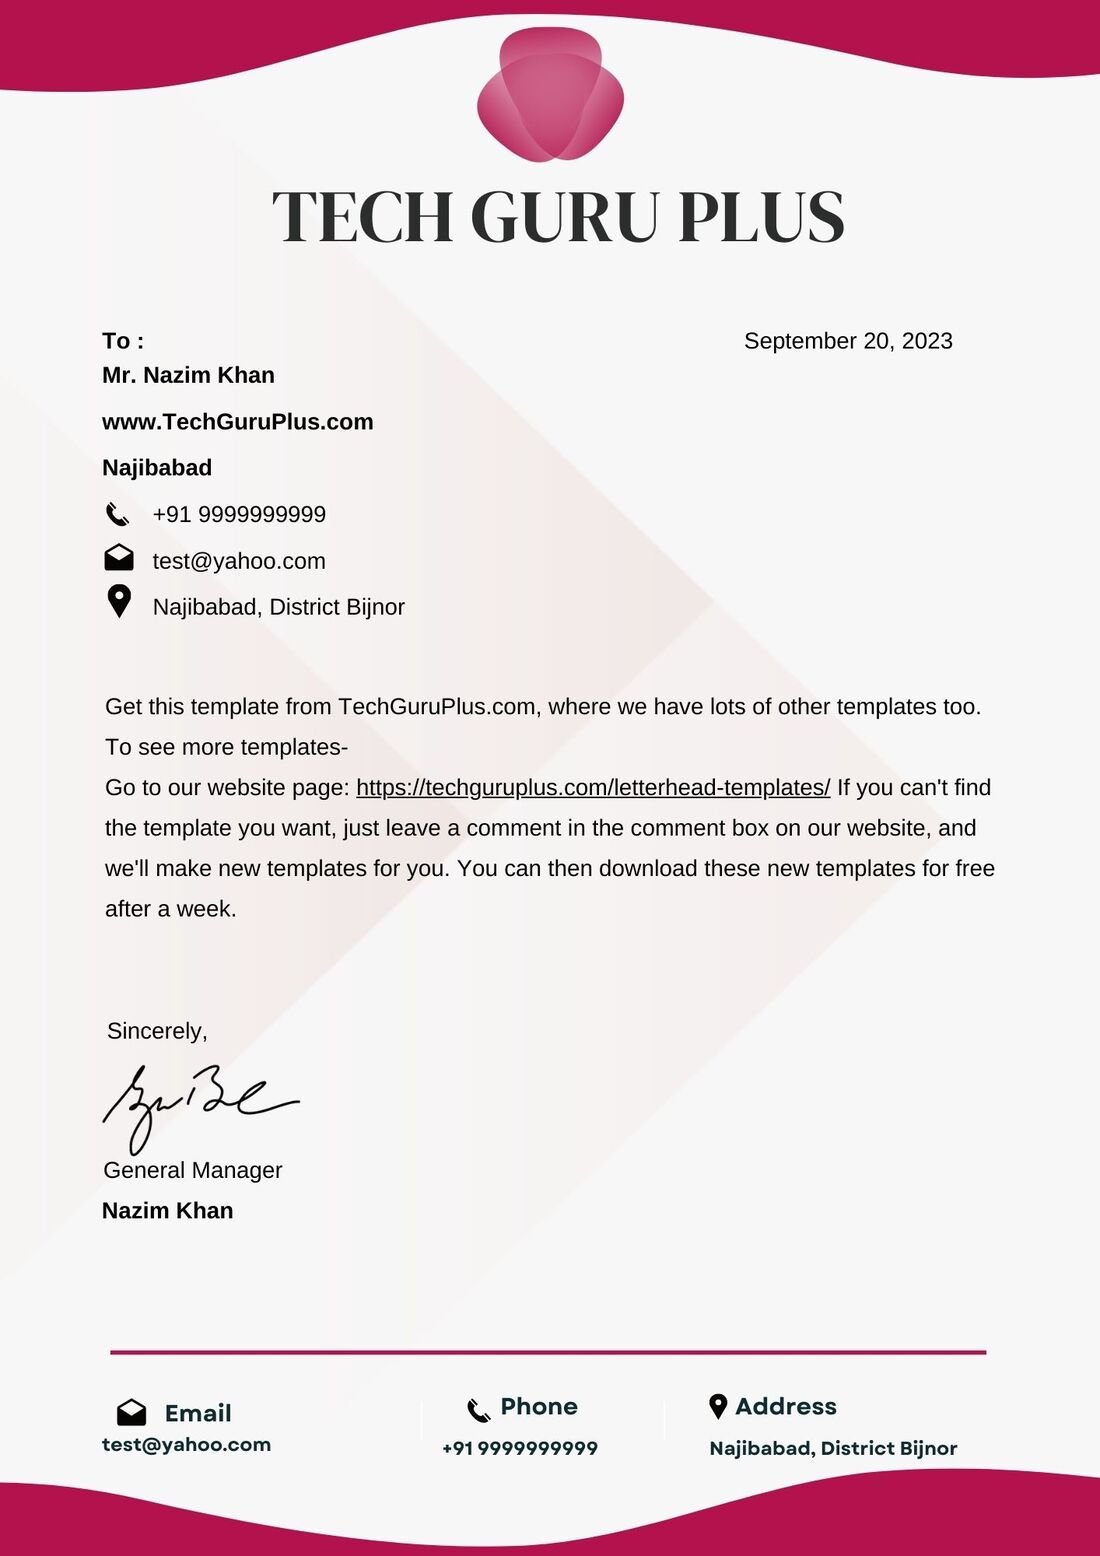 Free Restaurant Letterhead Templates To Download (.docx)